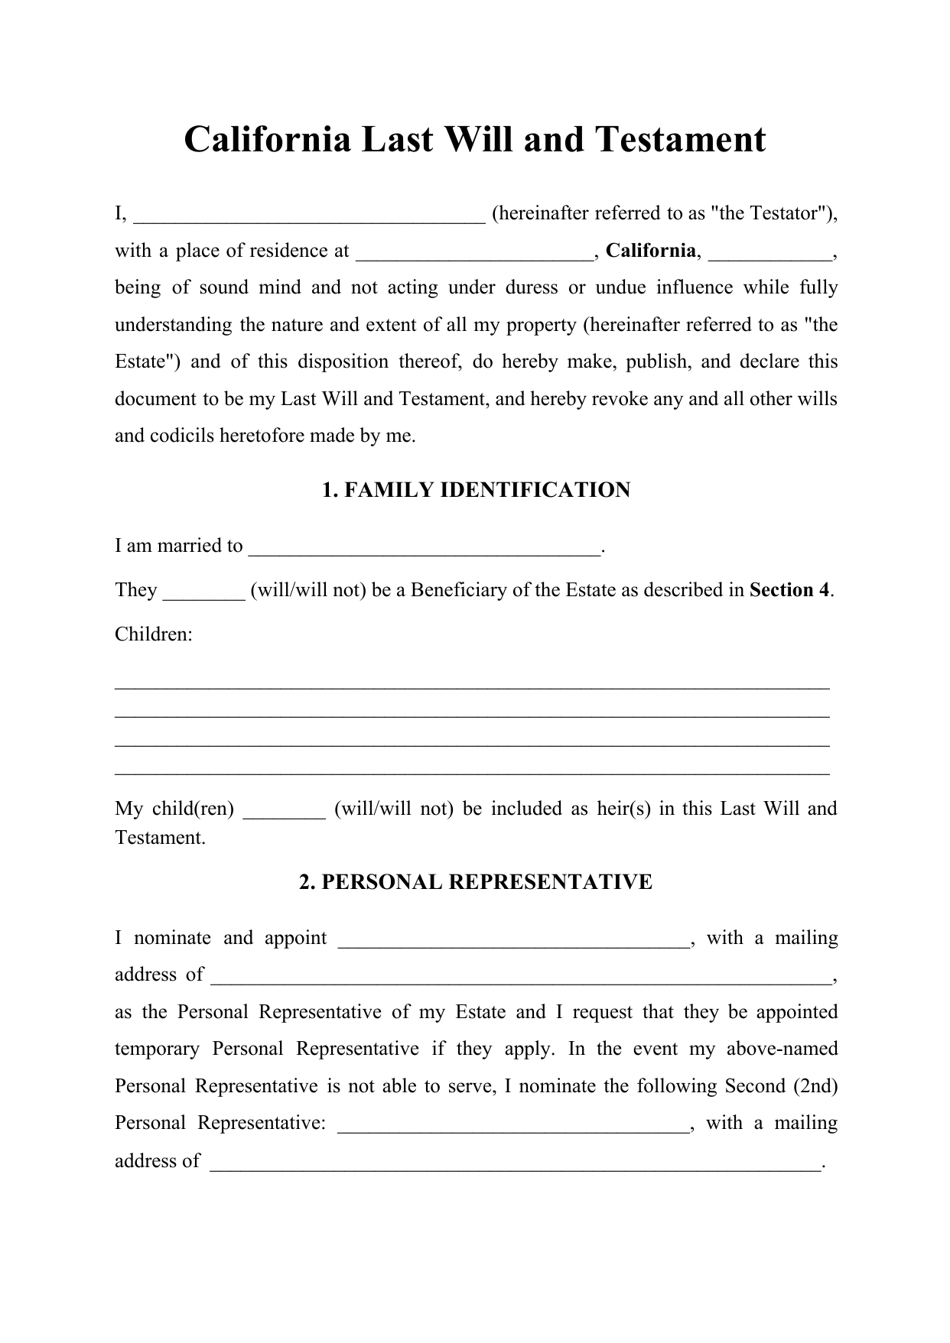 Last Will and Testament Template - California, Page 1